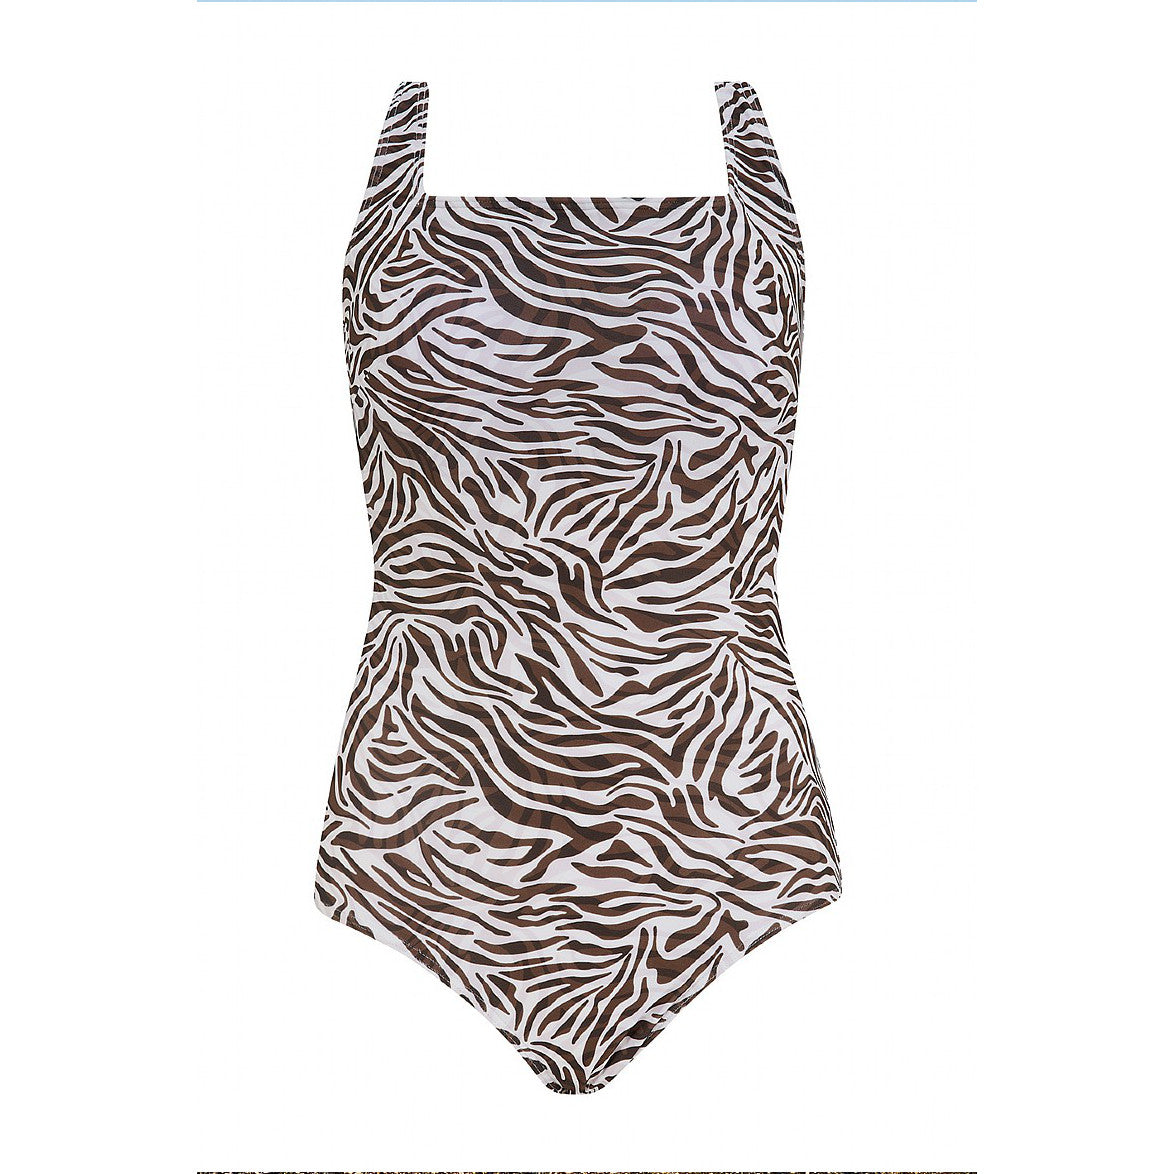 Tanzania Swimsuit in a bold zebra print | Swimwear from Nicola Jane | Pocketed mastectomy swimwear for women touched by breast cancer